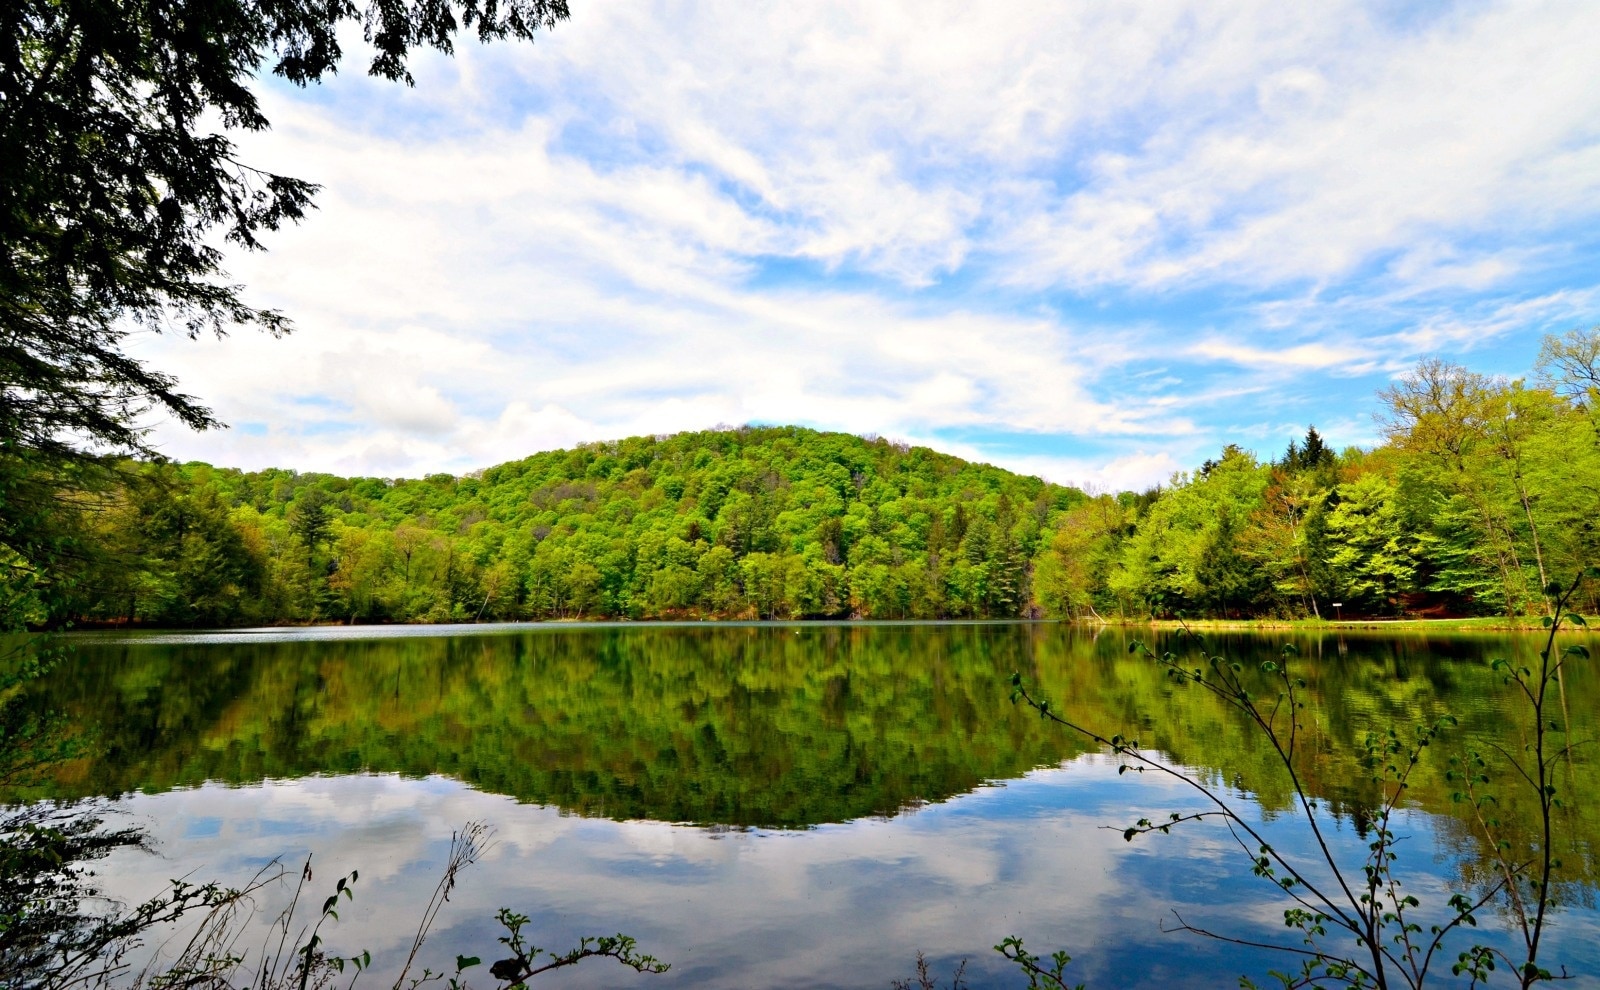 When visiting Woodstock, Vermont, one not-to-miss outdoor attraction is the Marsh - Billings - Rockefeller National Historical Park, the first National Park in Vermont. The site is full of ambient trails with different atmospheres, whether you want to summit a mountain, run through a field or picnic on a lovely lake. Here you see The Pogue, a 14-acre (6-hectare) lake, featuring mountain reflections and beautiful Great Blue herons hungry for bass fish. For me, this spot was pure heaven in Vermont. #travel #AmazonDestinations #spon 